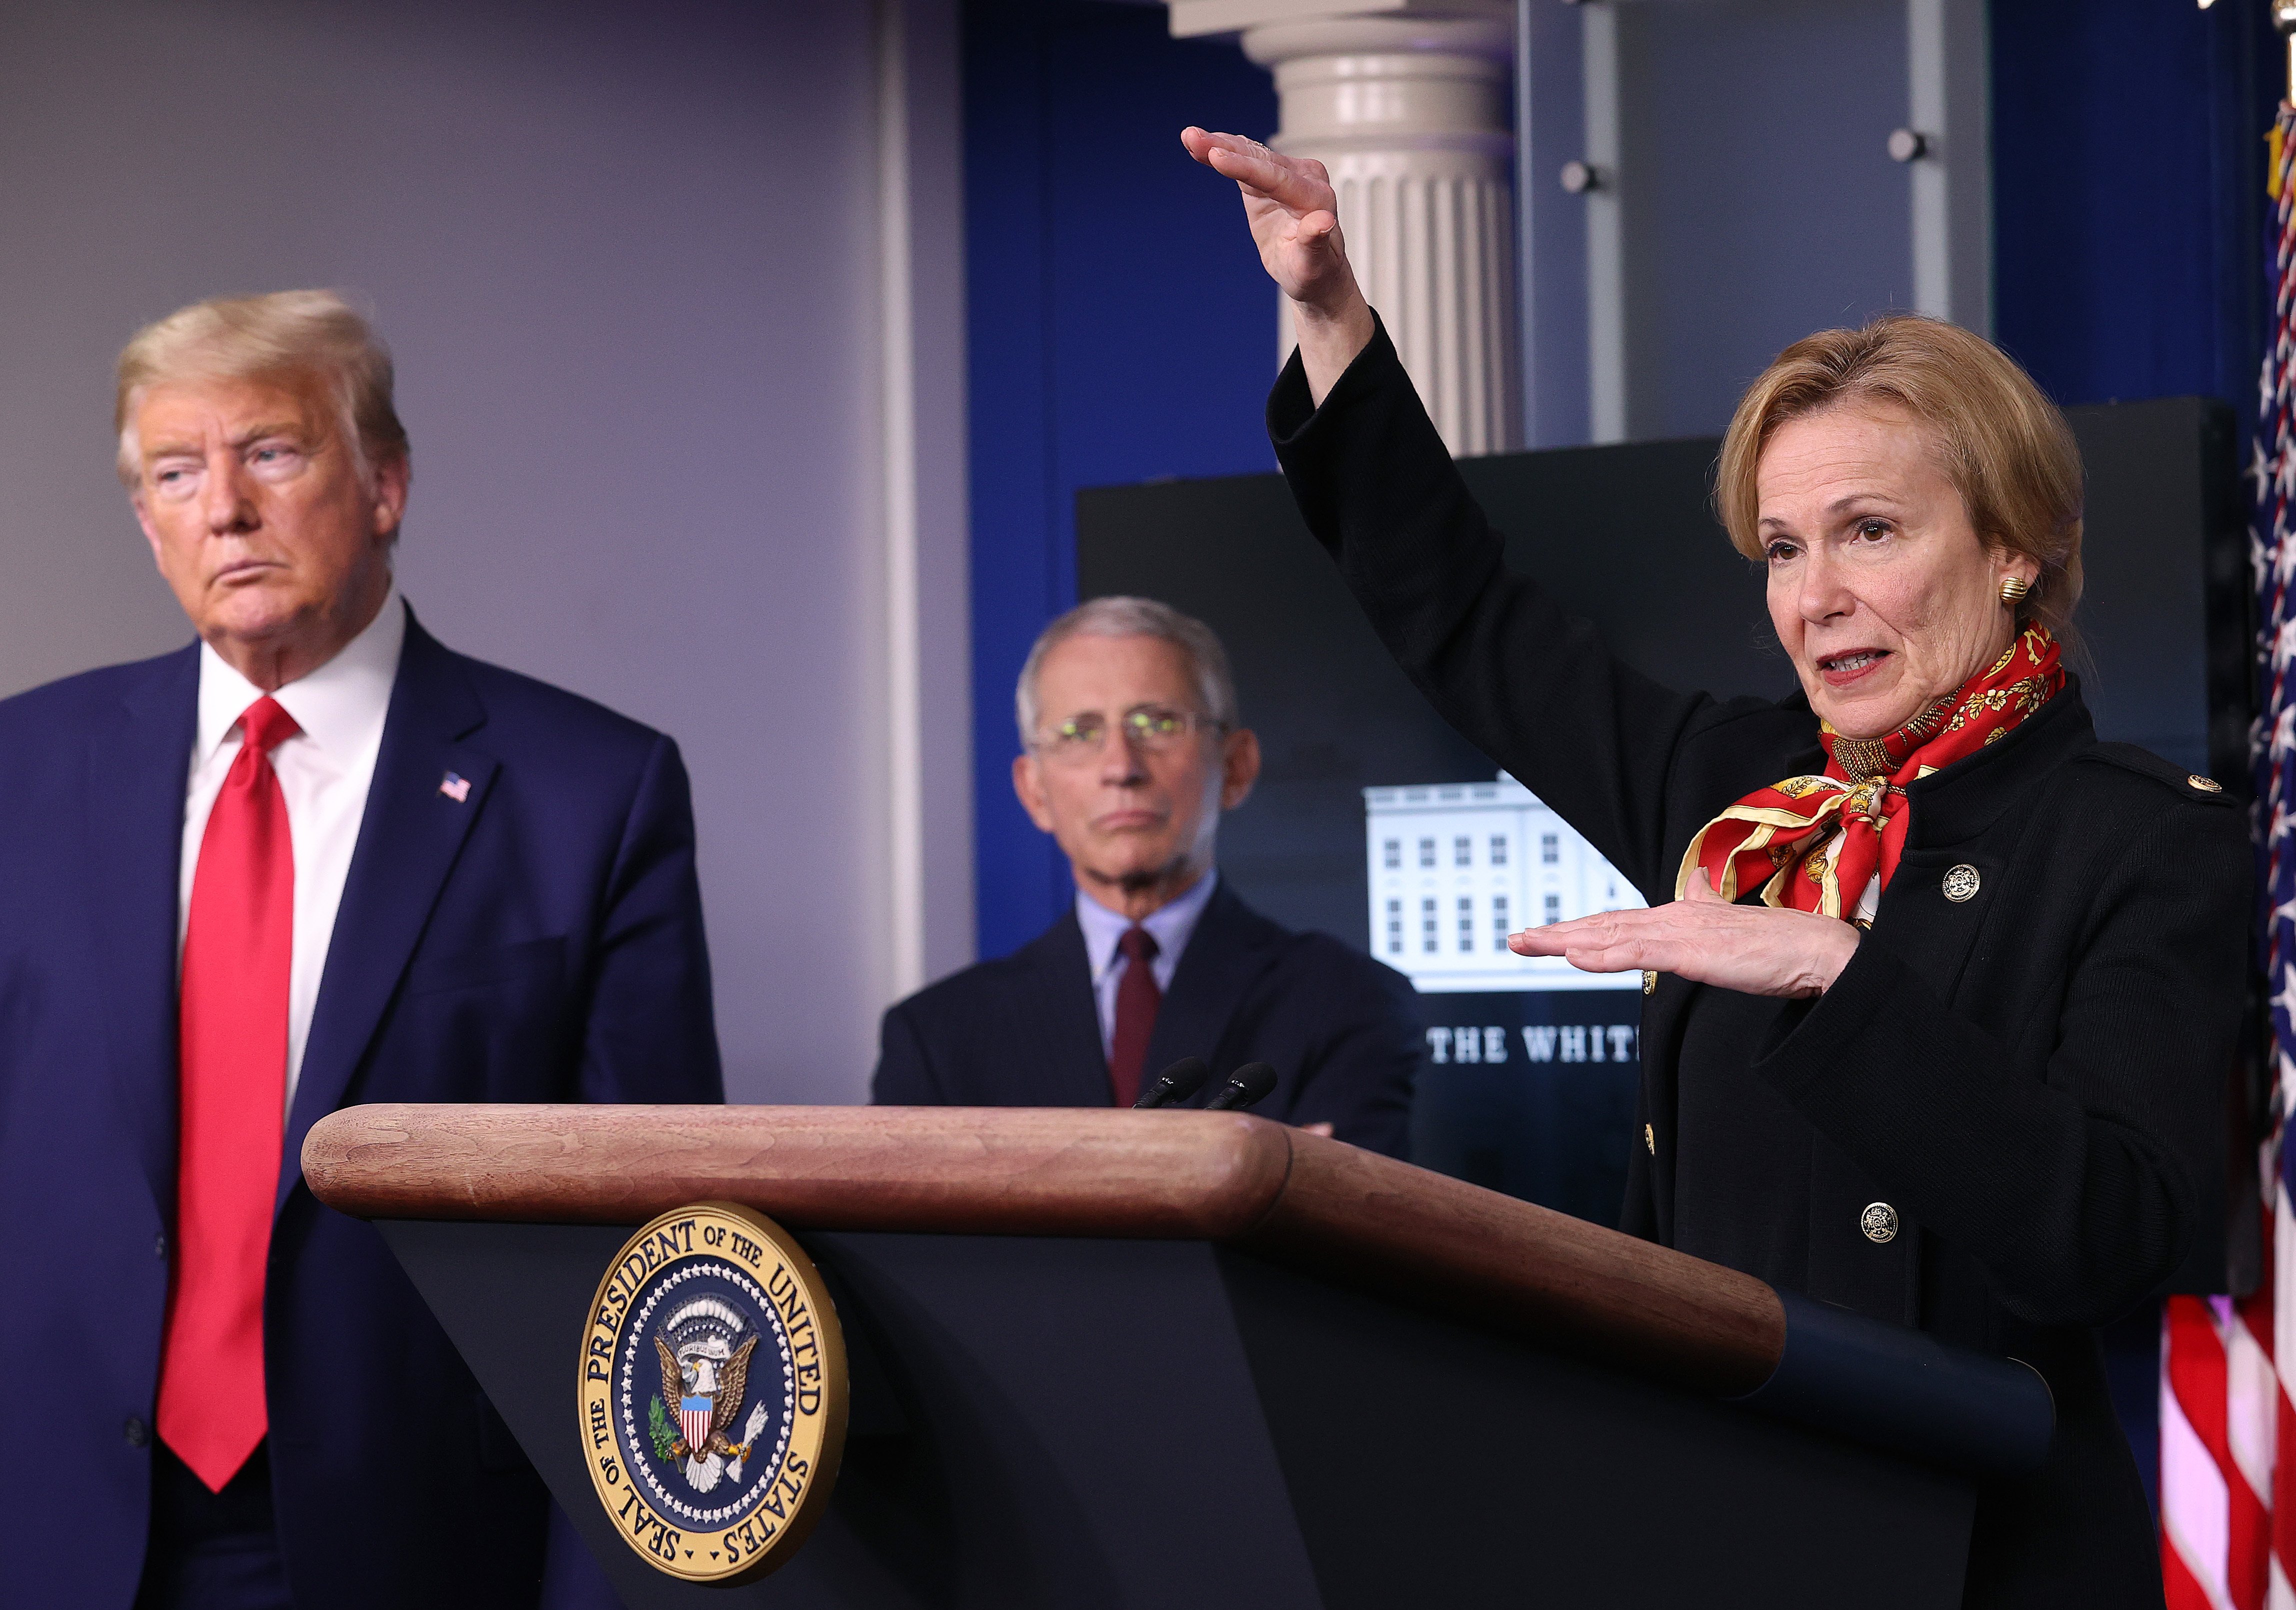 WASHINGTON, DC - MARCH 31: White House coronavirus response coordinator Debbie Birx speaks while flanked by President Donald Trump (L), and Dr. Anthony Fauci (C), director of the National Institute of Allergy and Infectious Diseases, during the daily coronavirus task force briefing in the Brady Briefing room at the White House on March 31, 2020 in Washington, DC. With the nationwide death toll rising due to the coronavirus, the United States has extended its social distancing practices through the end of April, while many states have issued stay-at-home orders that strongly discourage residents from leaving home unless absolutely necessary or essential. (Photo by Win McNamee/Getty Images)